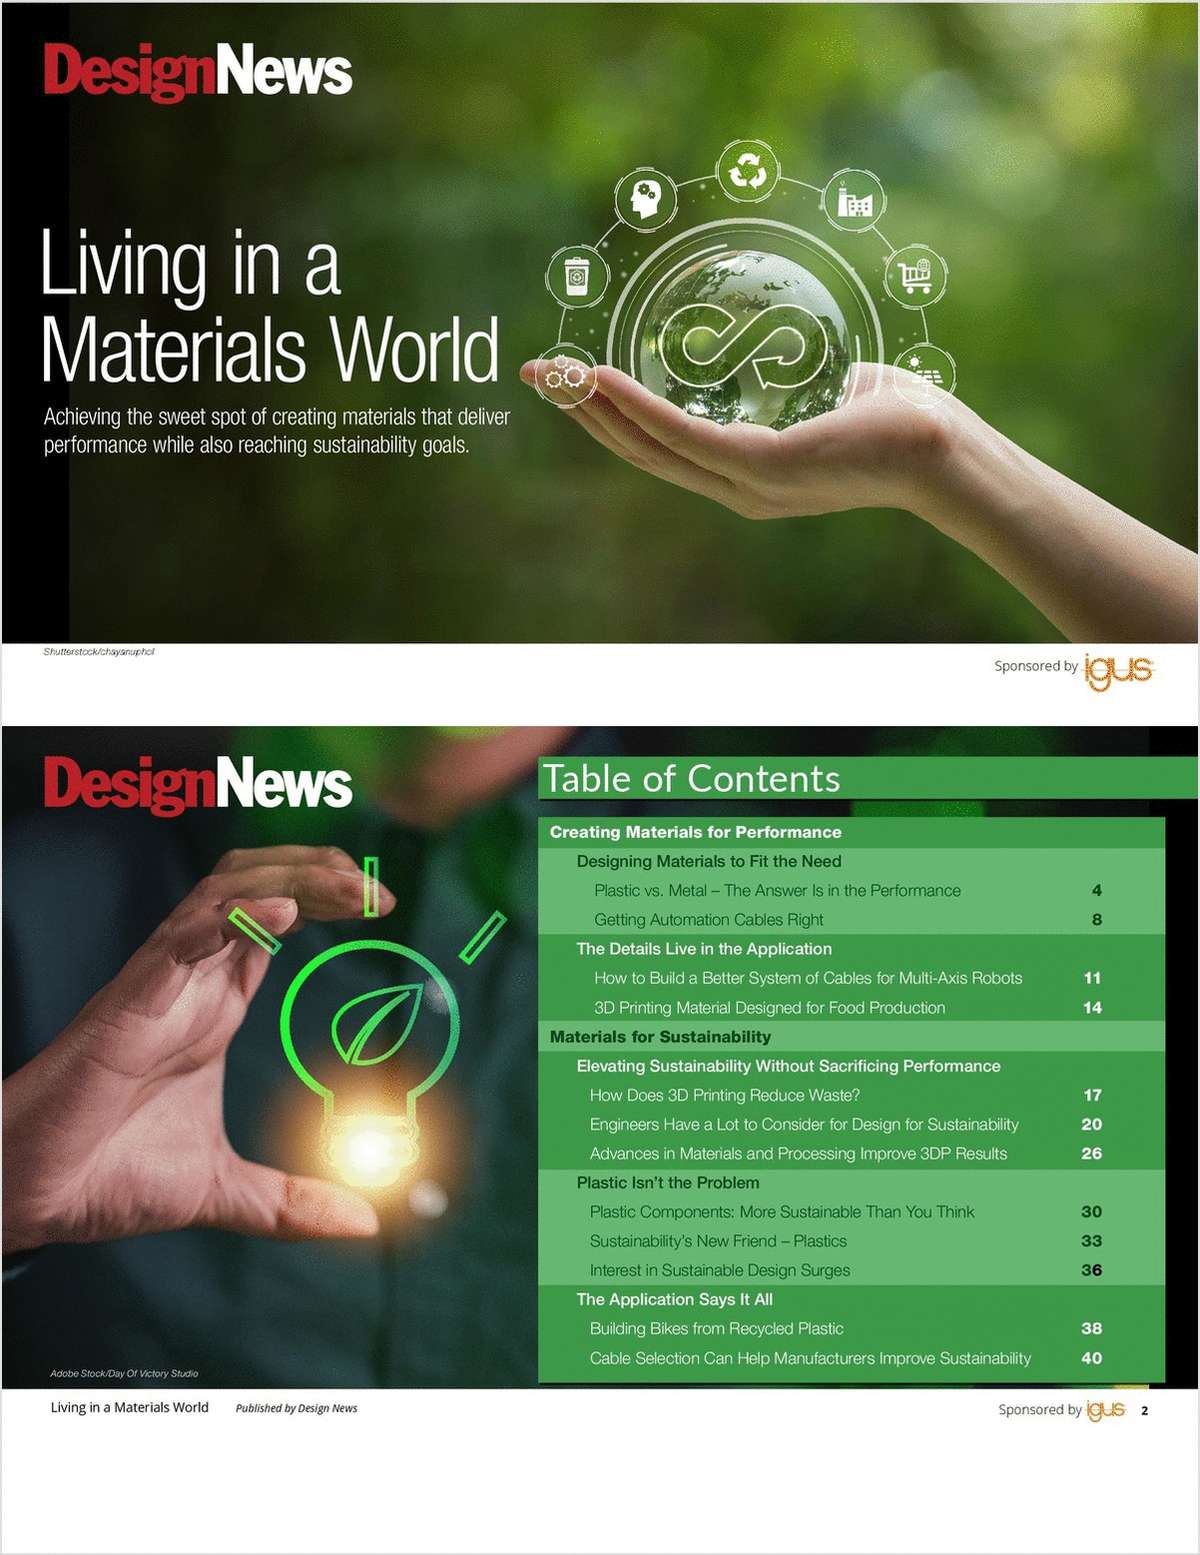 Living in a Materials World